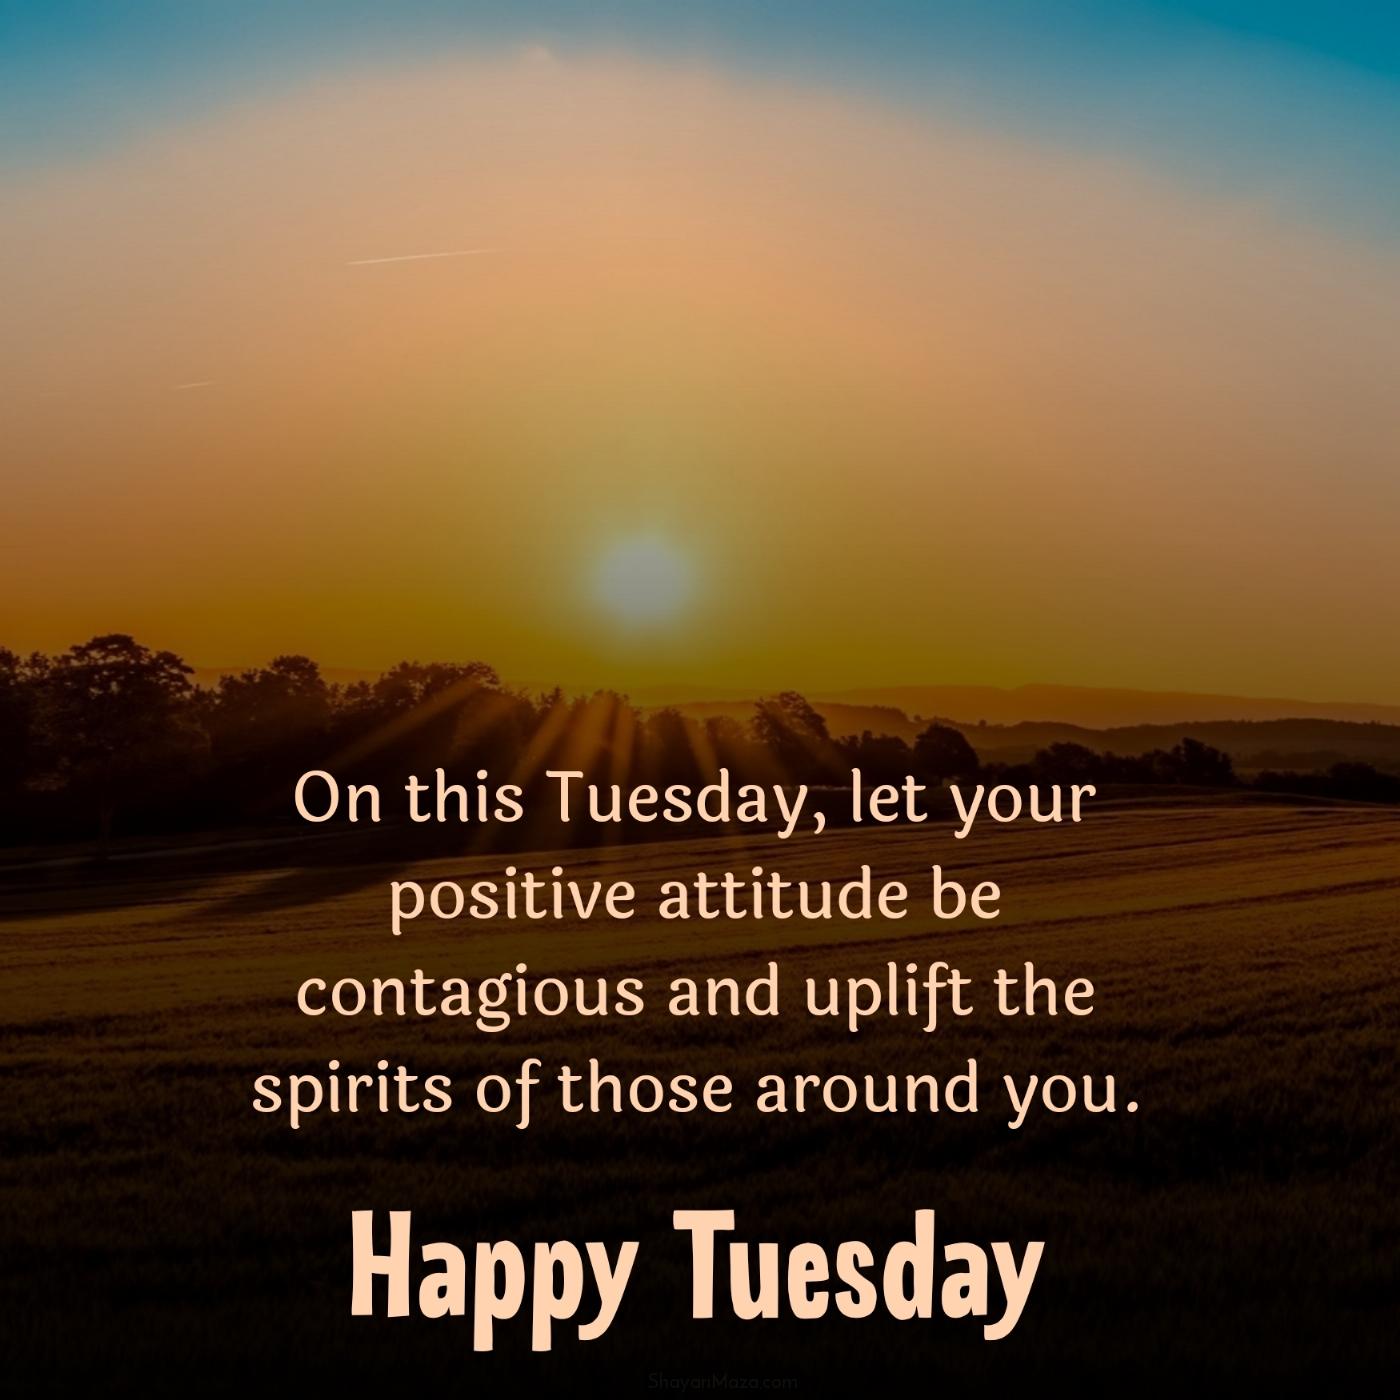 On this Tuesday let your positive attitude be contagious